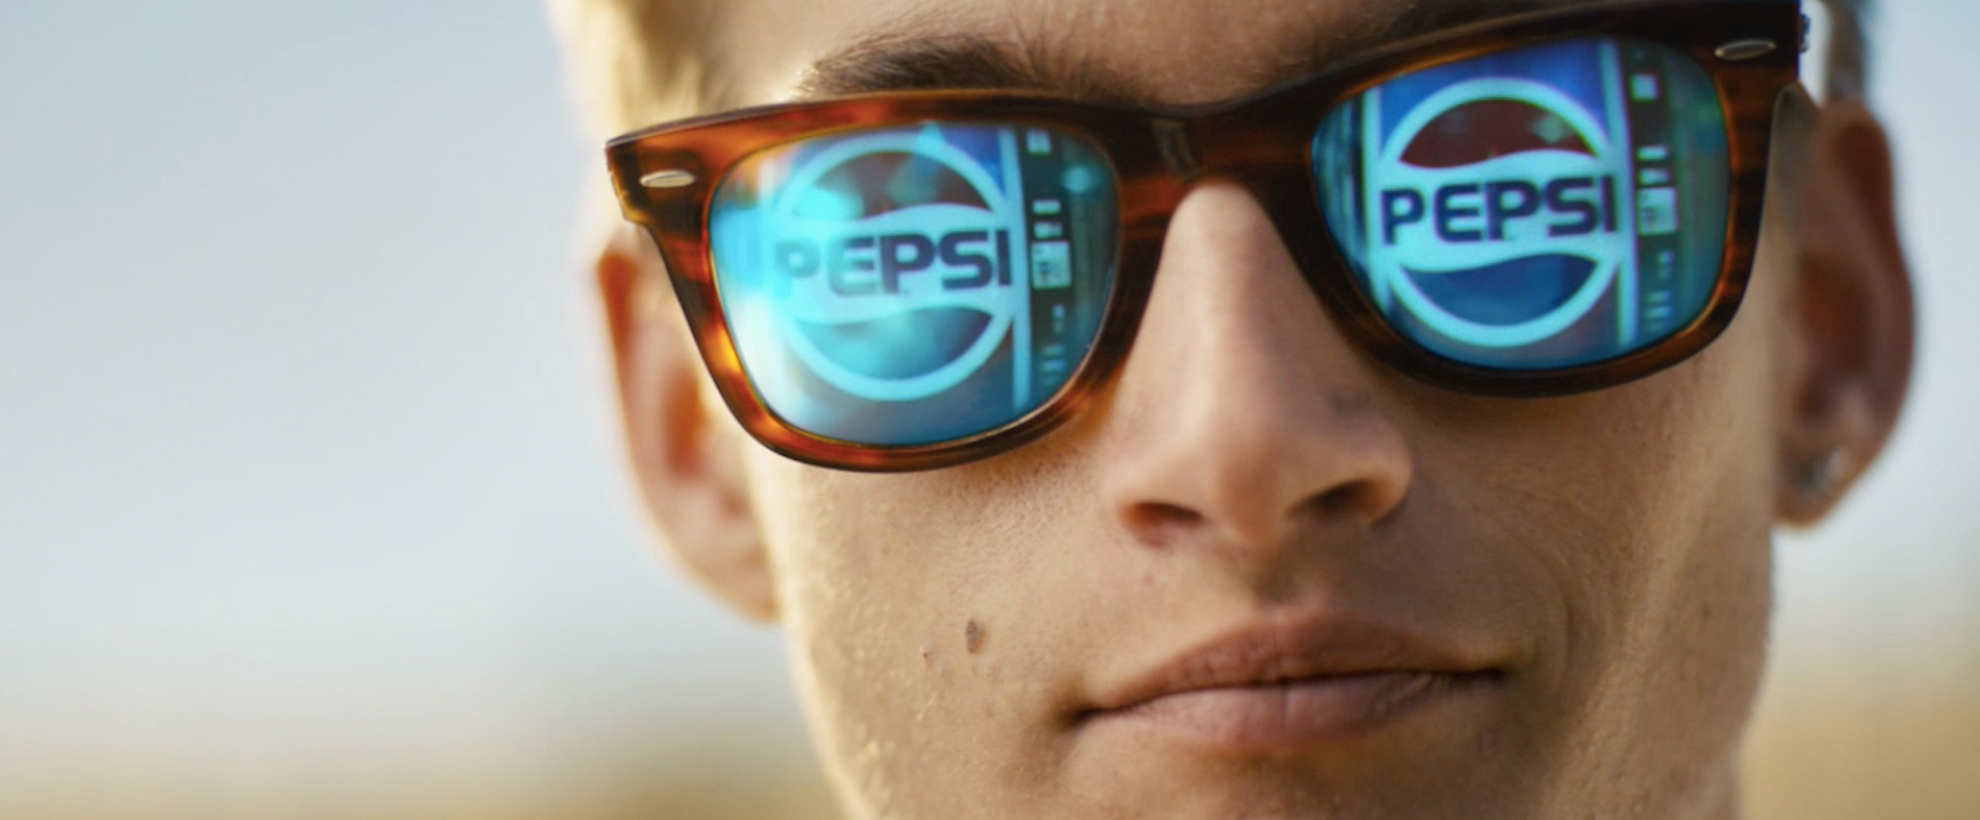 A blonde boy wears sunglasses with Pepsi in the reflection